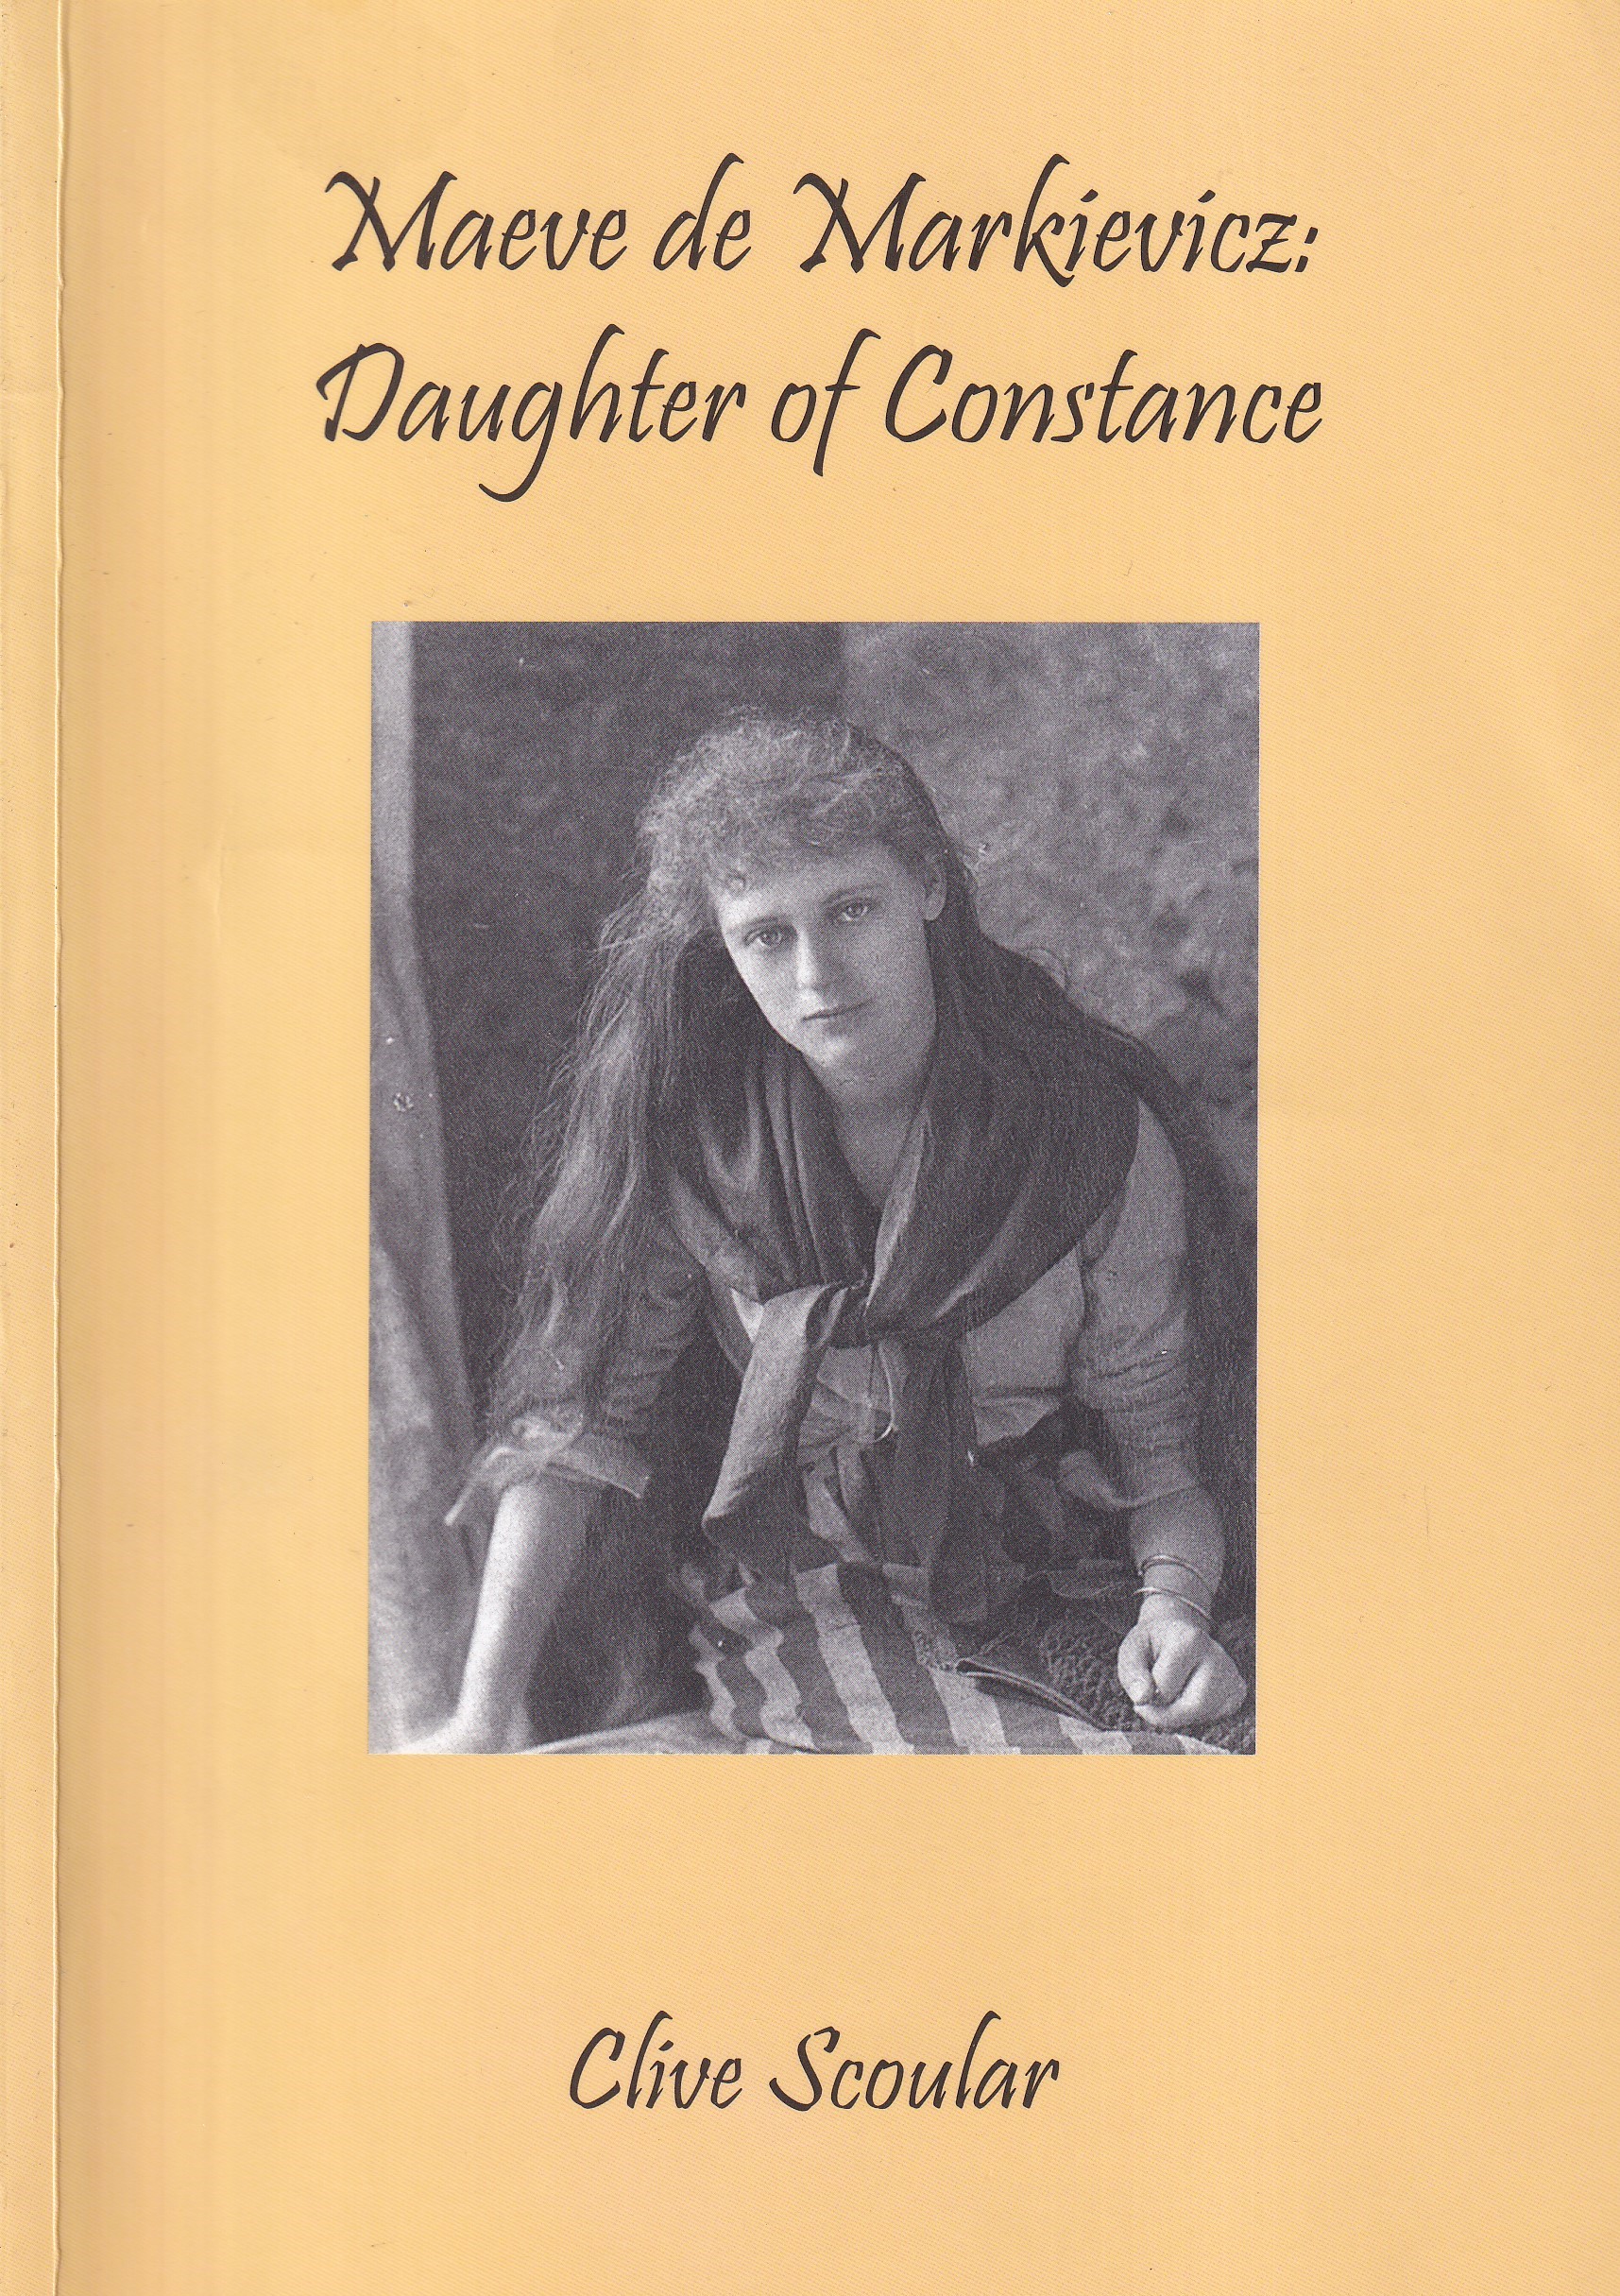 Maeve de Markievicz: Daughter of Constance- Signed by Clive Scoular